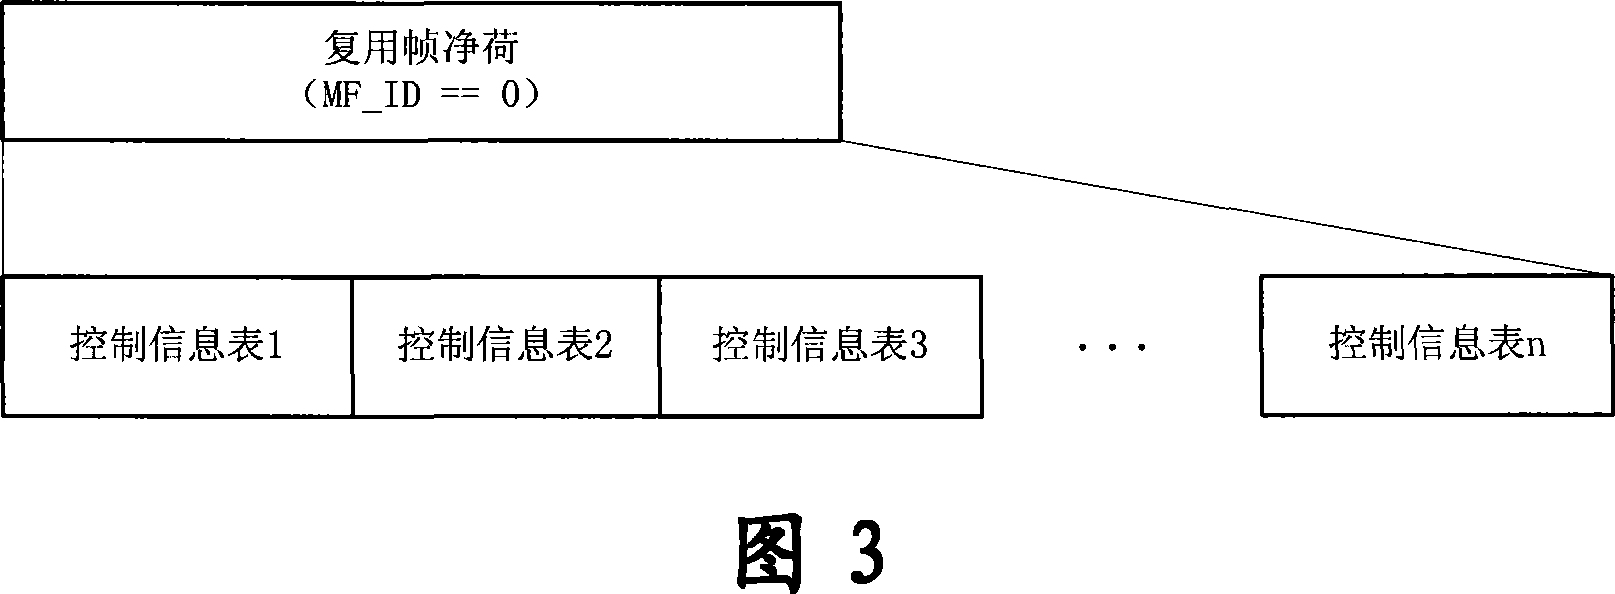 An emergency broadcasting service sending method and device